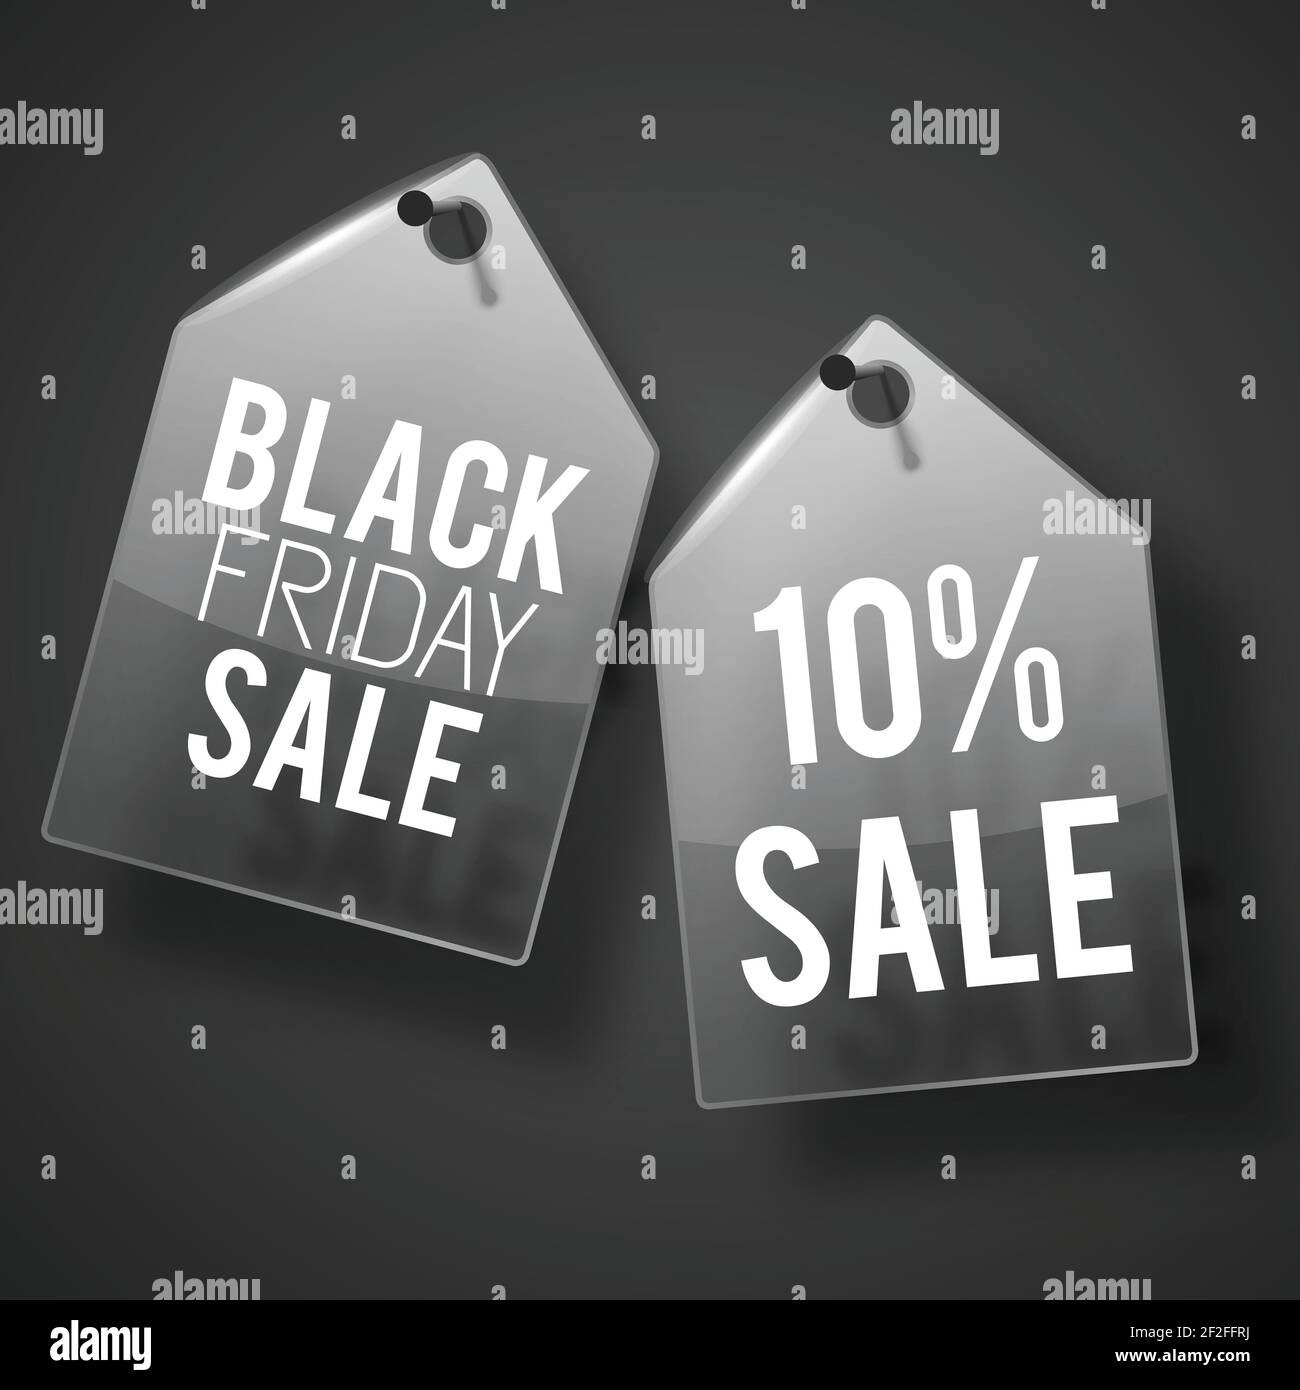 Two dark gray nailed down to the wall sale tag set with black friday sale description vector illustration Stock Vector